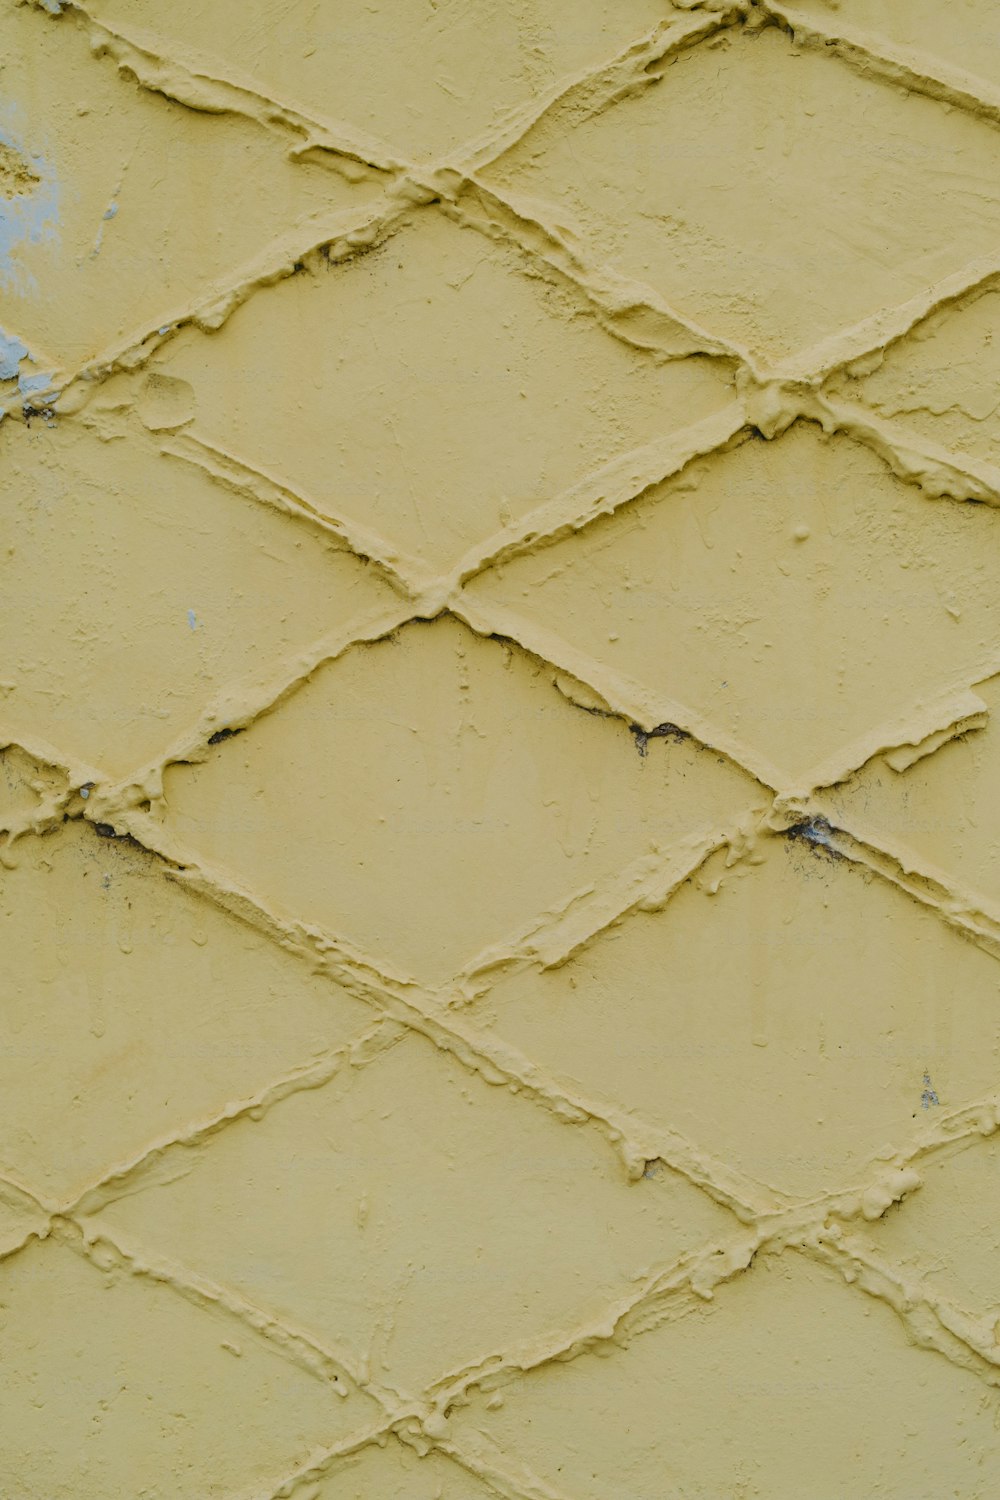 a close up of a yellow painted wall